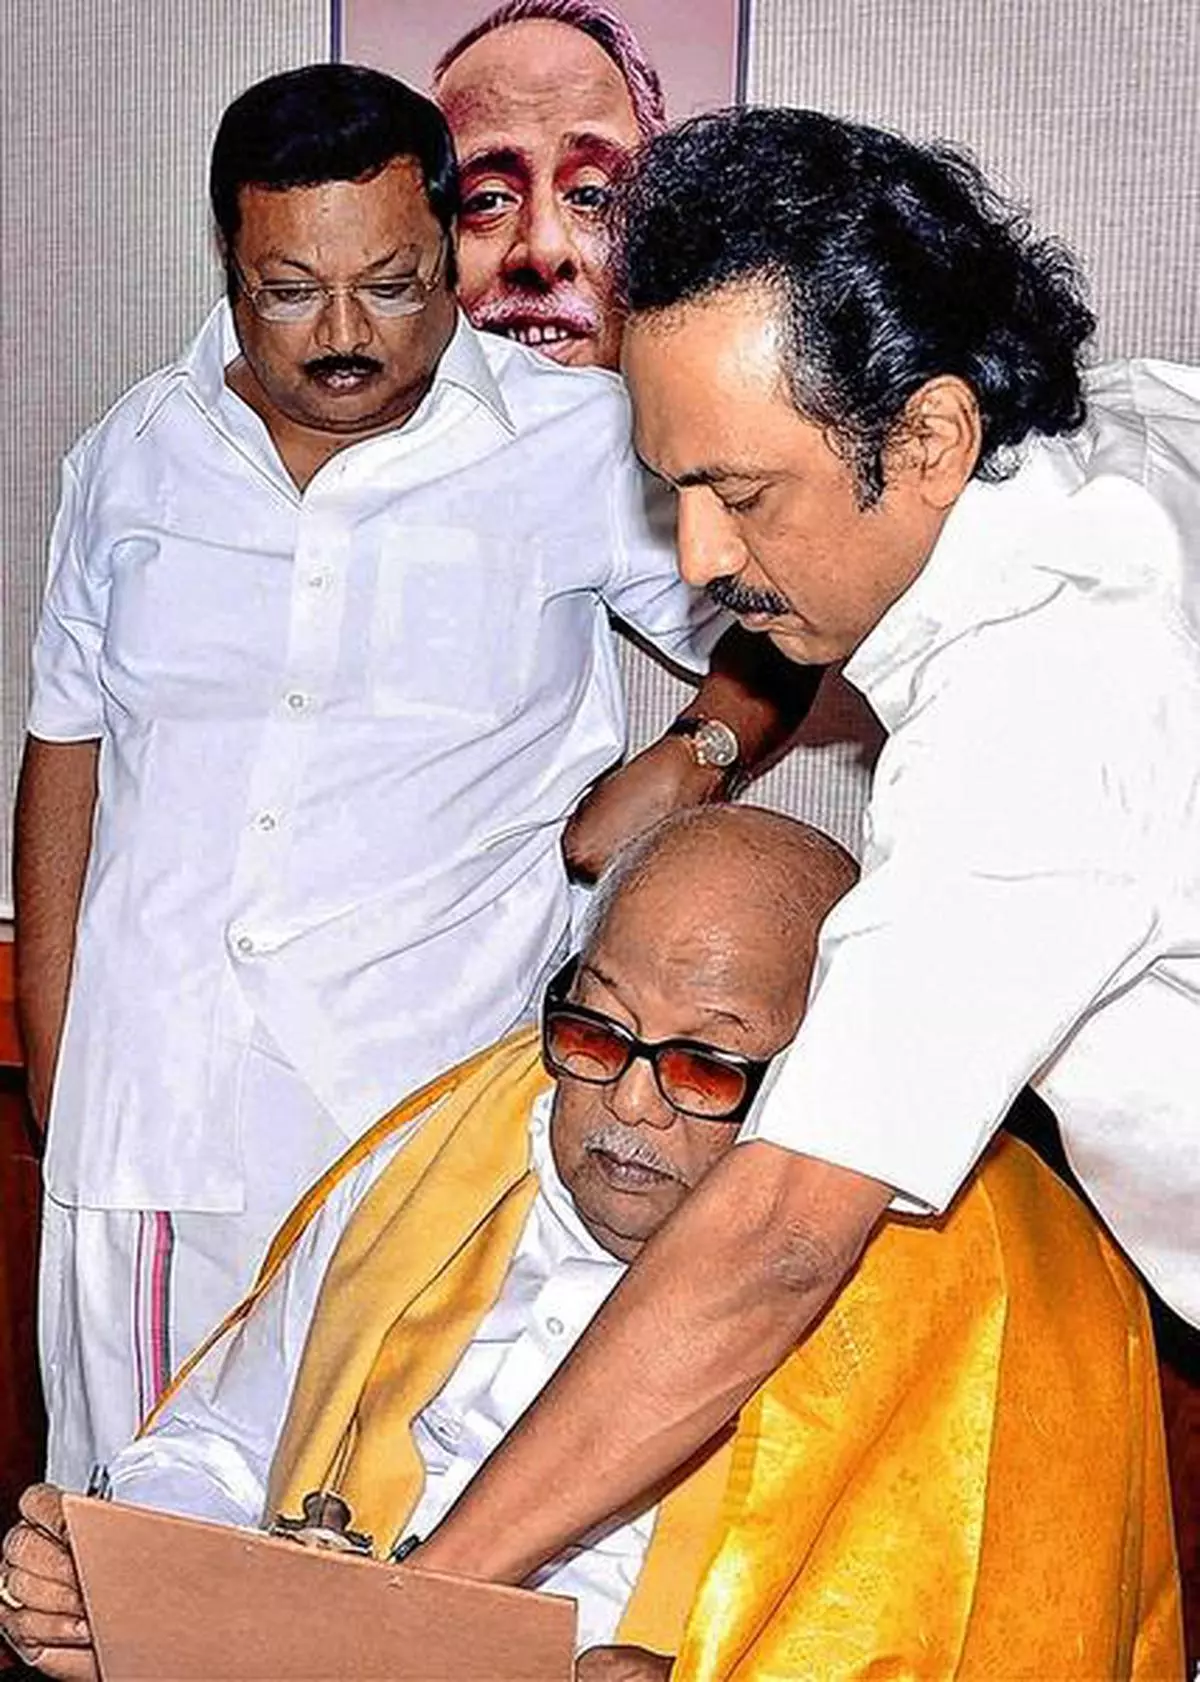 Can the DMK take this hit? - The Hindu BusinessLine